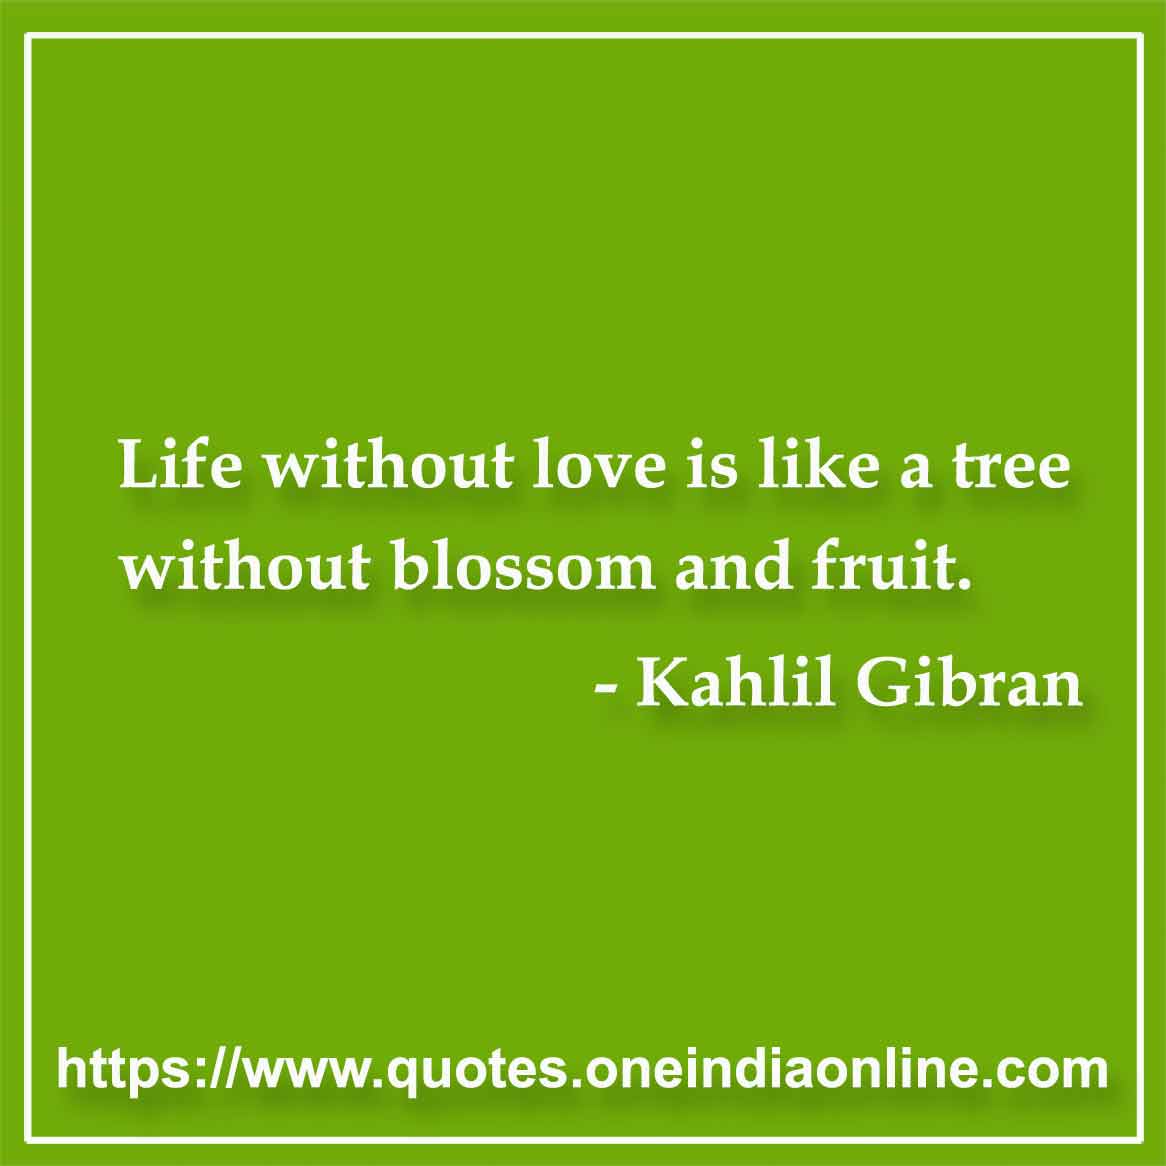 Life without love is like a tree without blossom and fruit.

-  by Kahlil Gibran